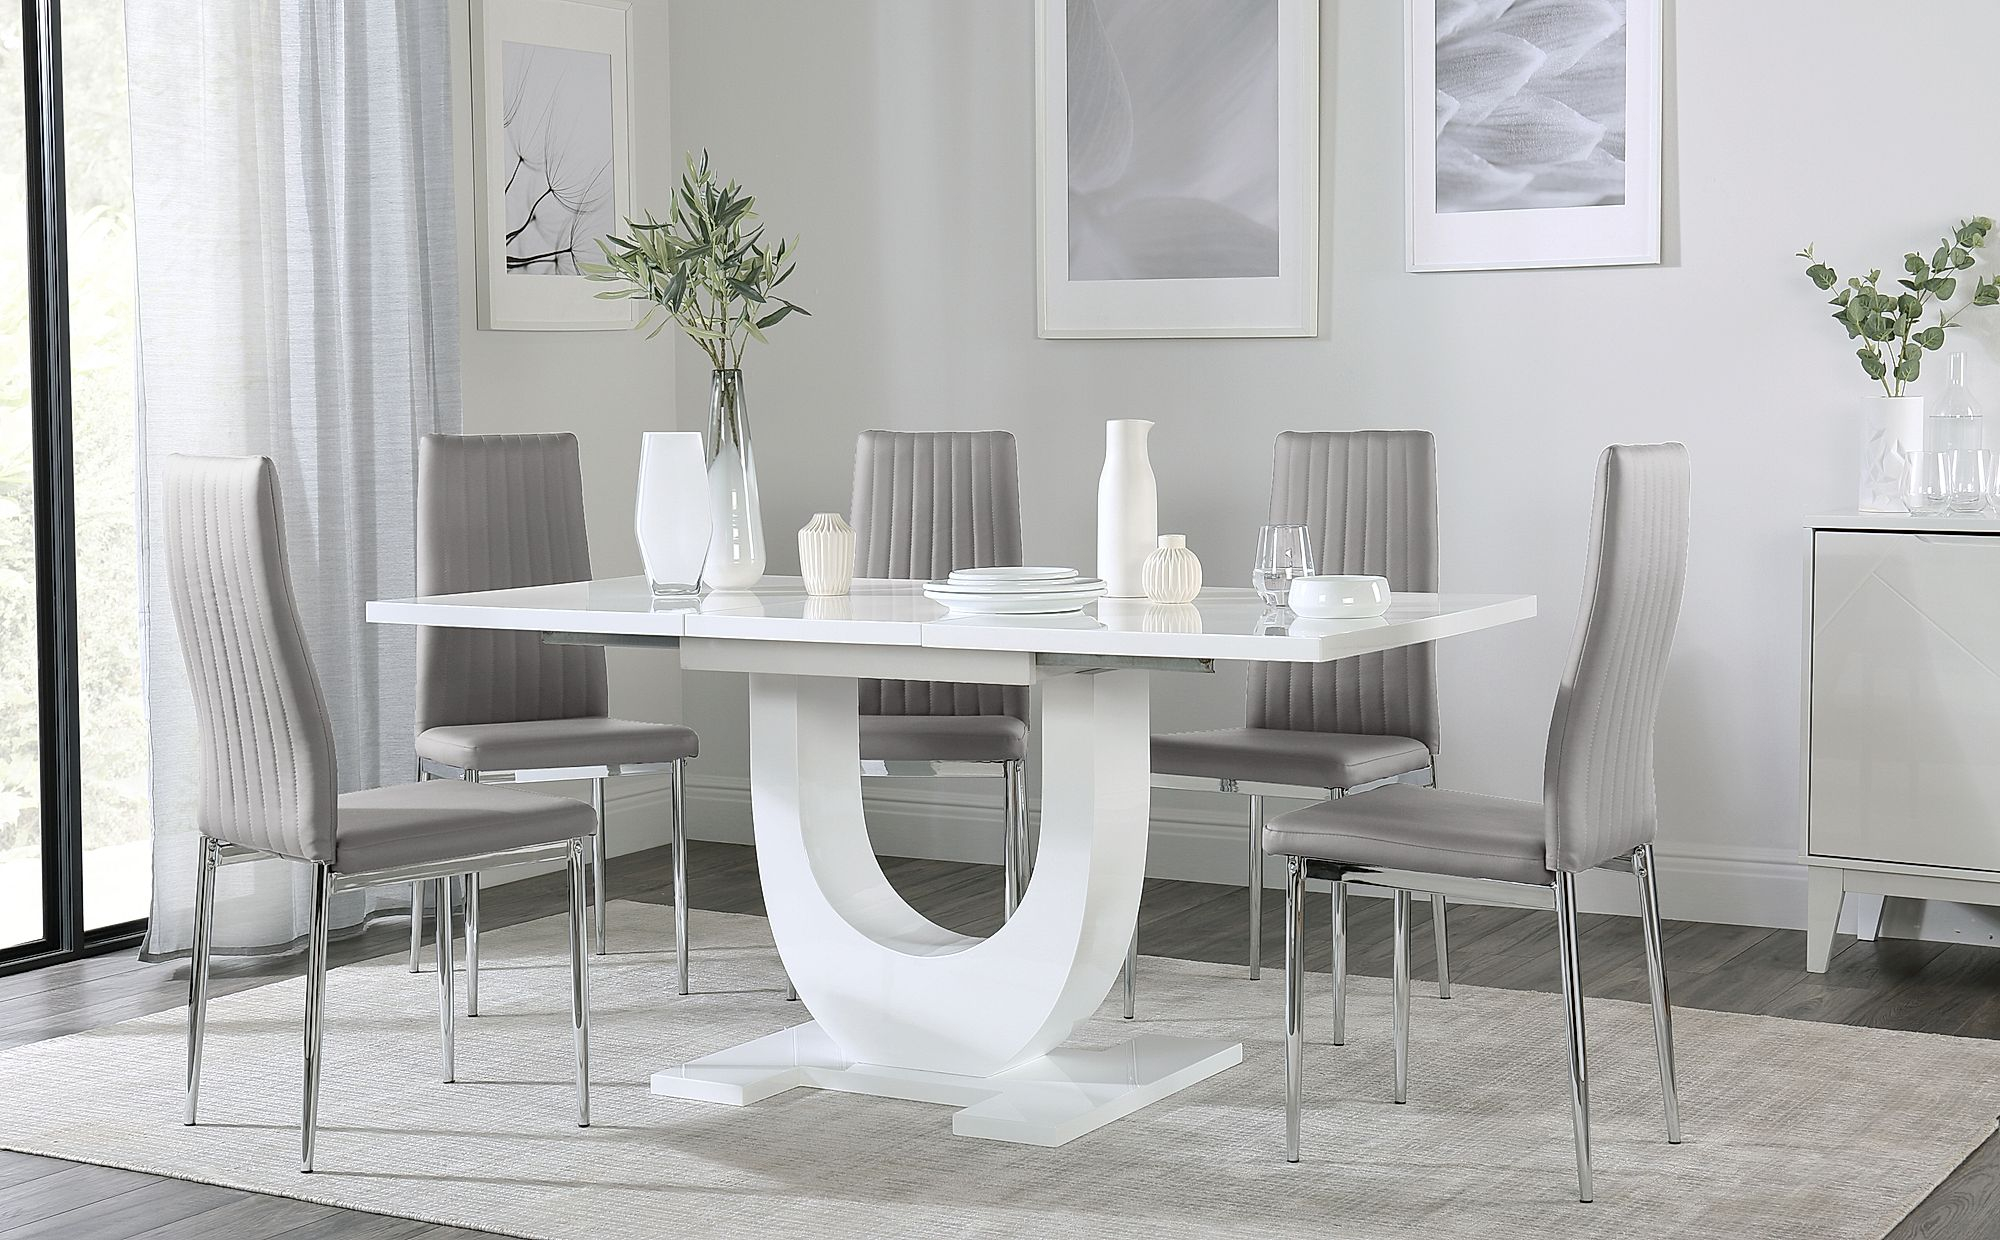 Oslo White High Gloss Extending Dining Table With 6 Leon Light Grey Dining Chairs within size 2000 X 1240